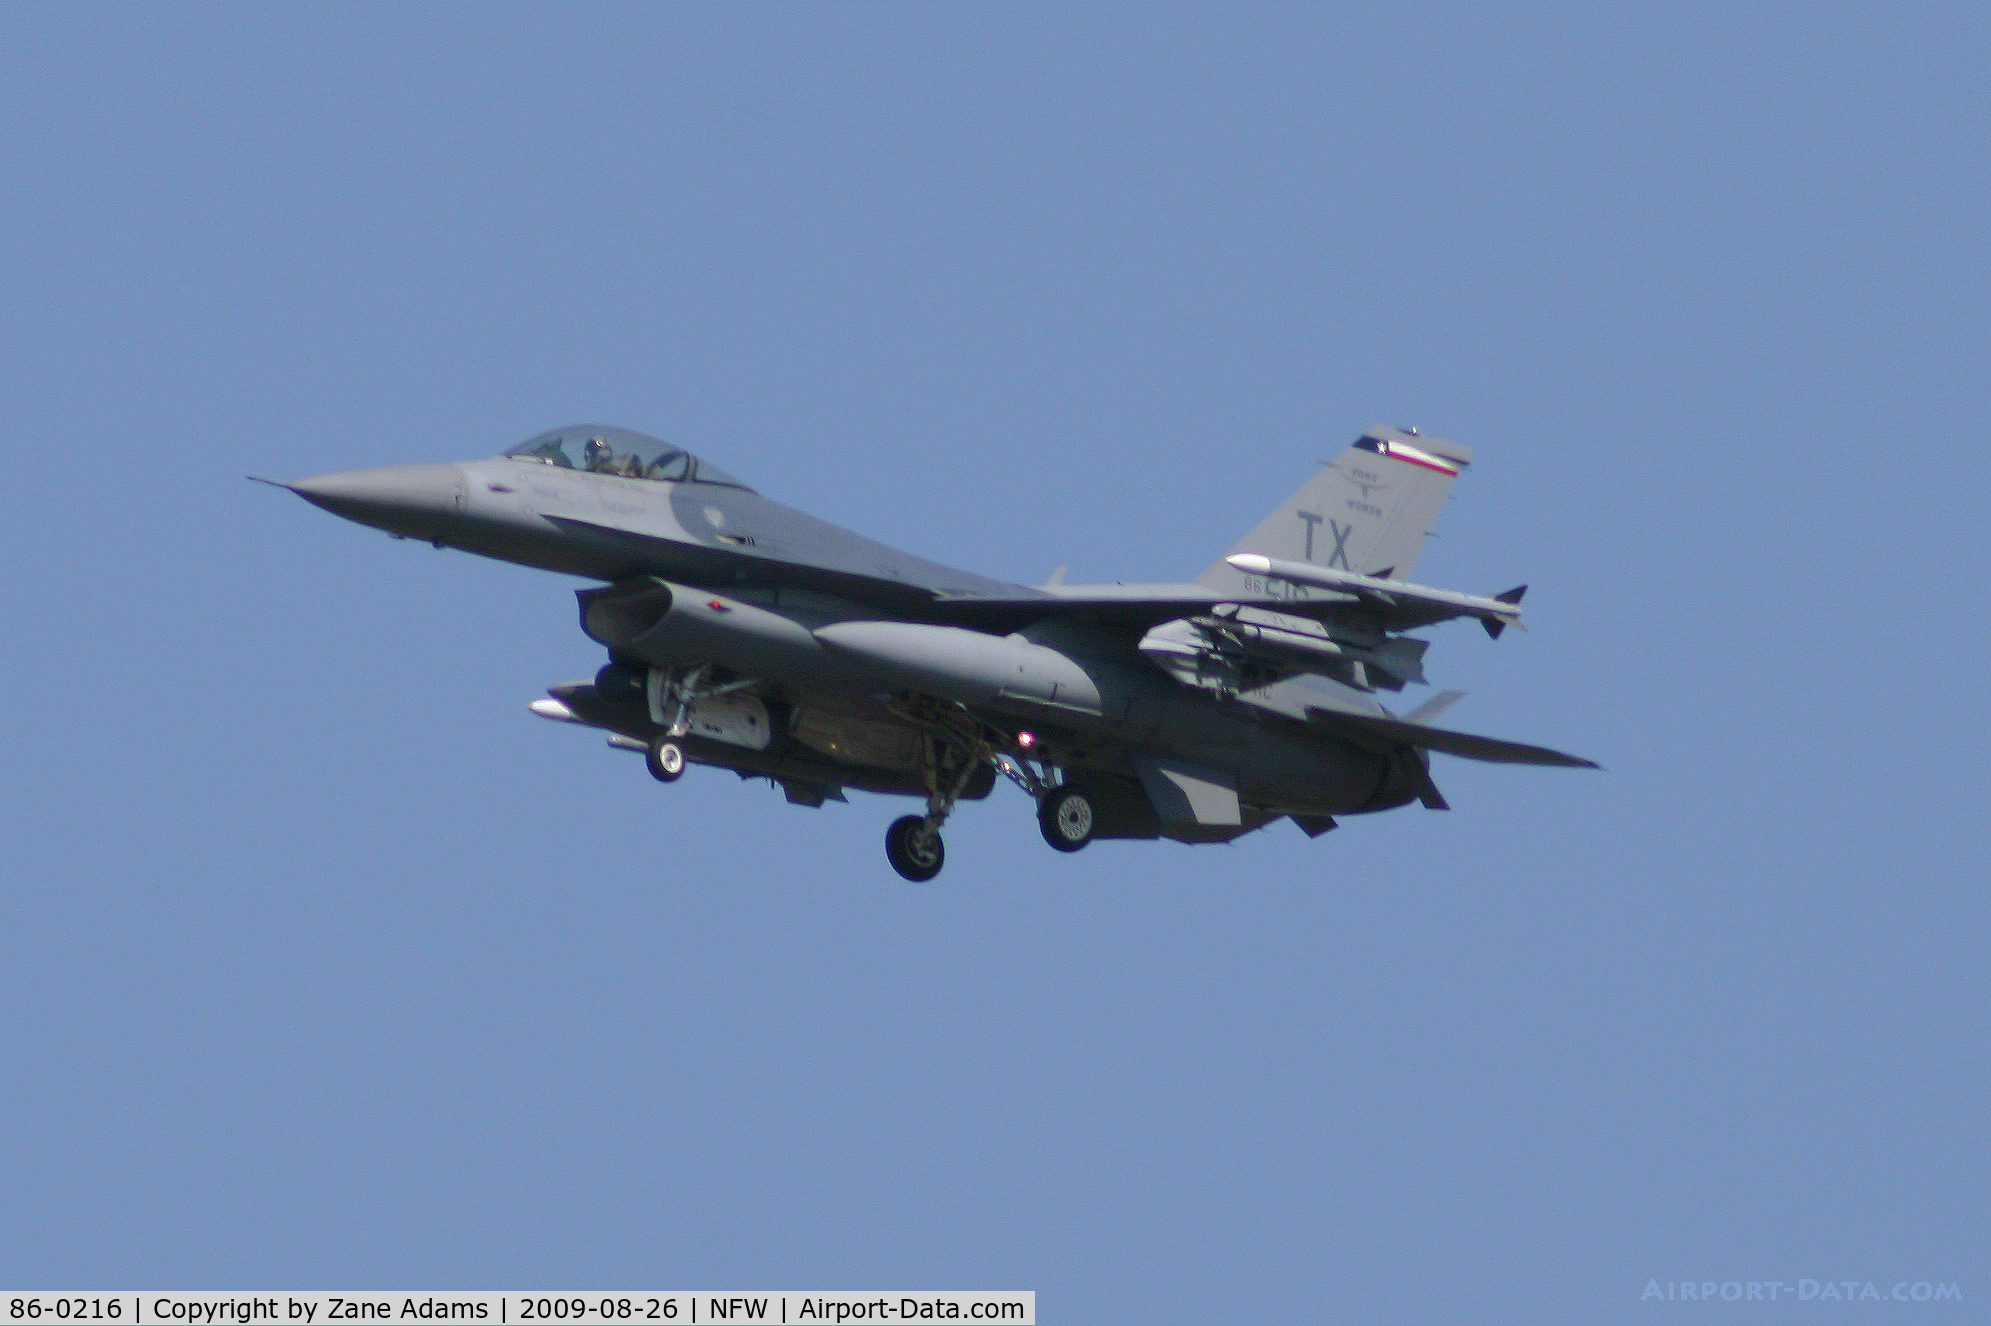 86-0216, 1986 General Dynamics F-16C Fighting Falcon C/N 5C-322, Texas ANG F-16 landing at NAS Fort Worth